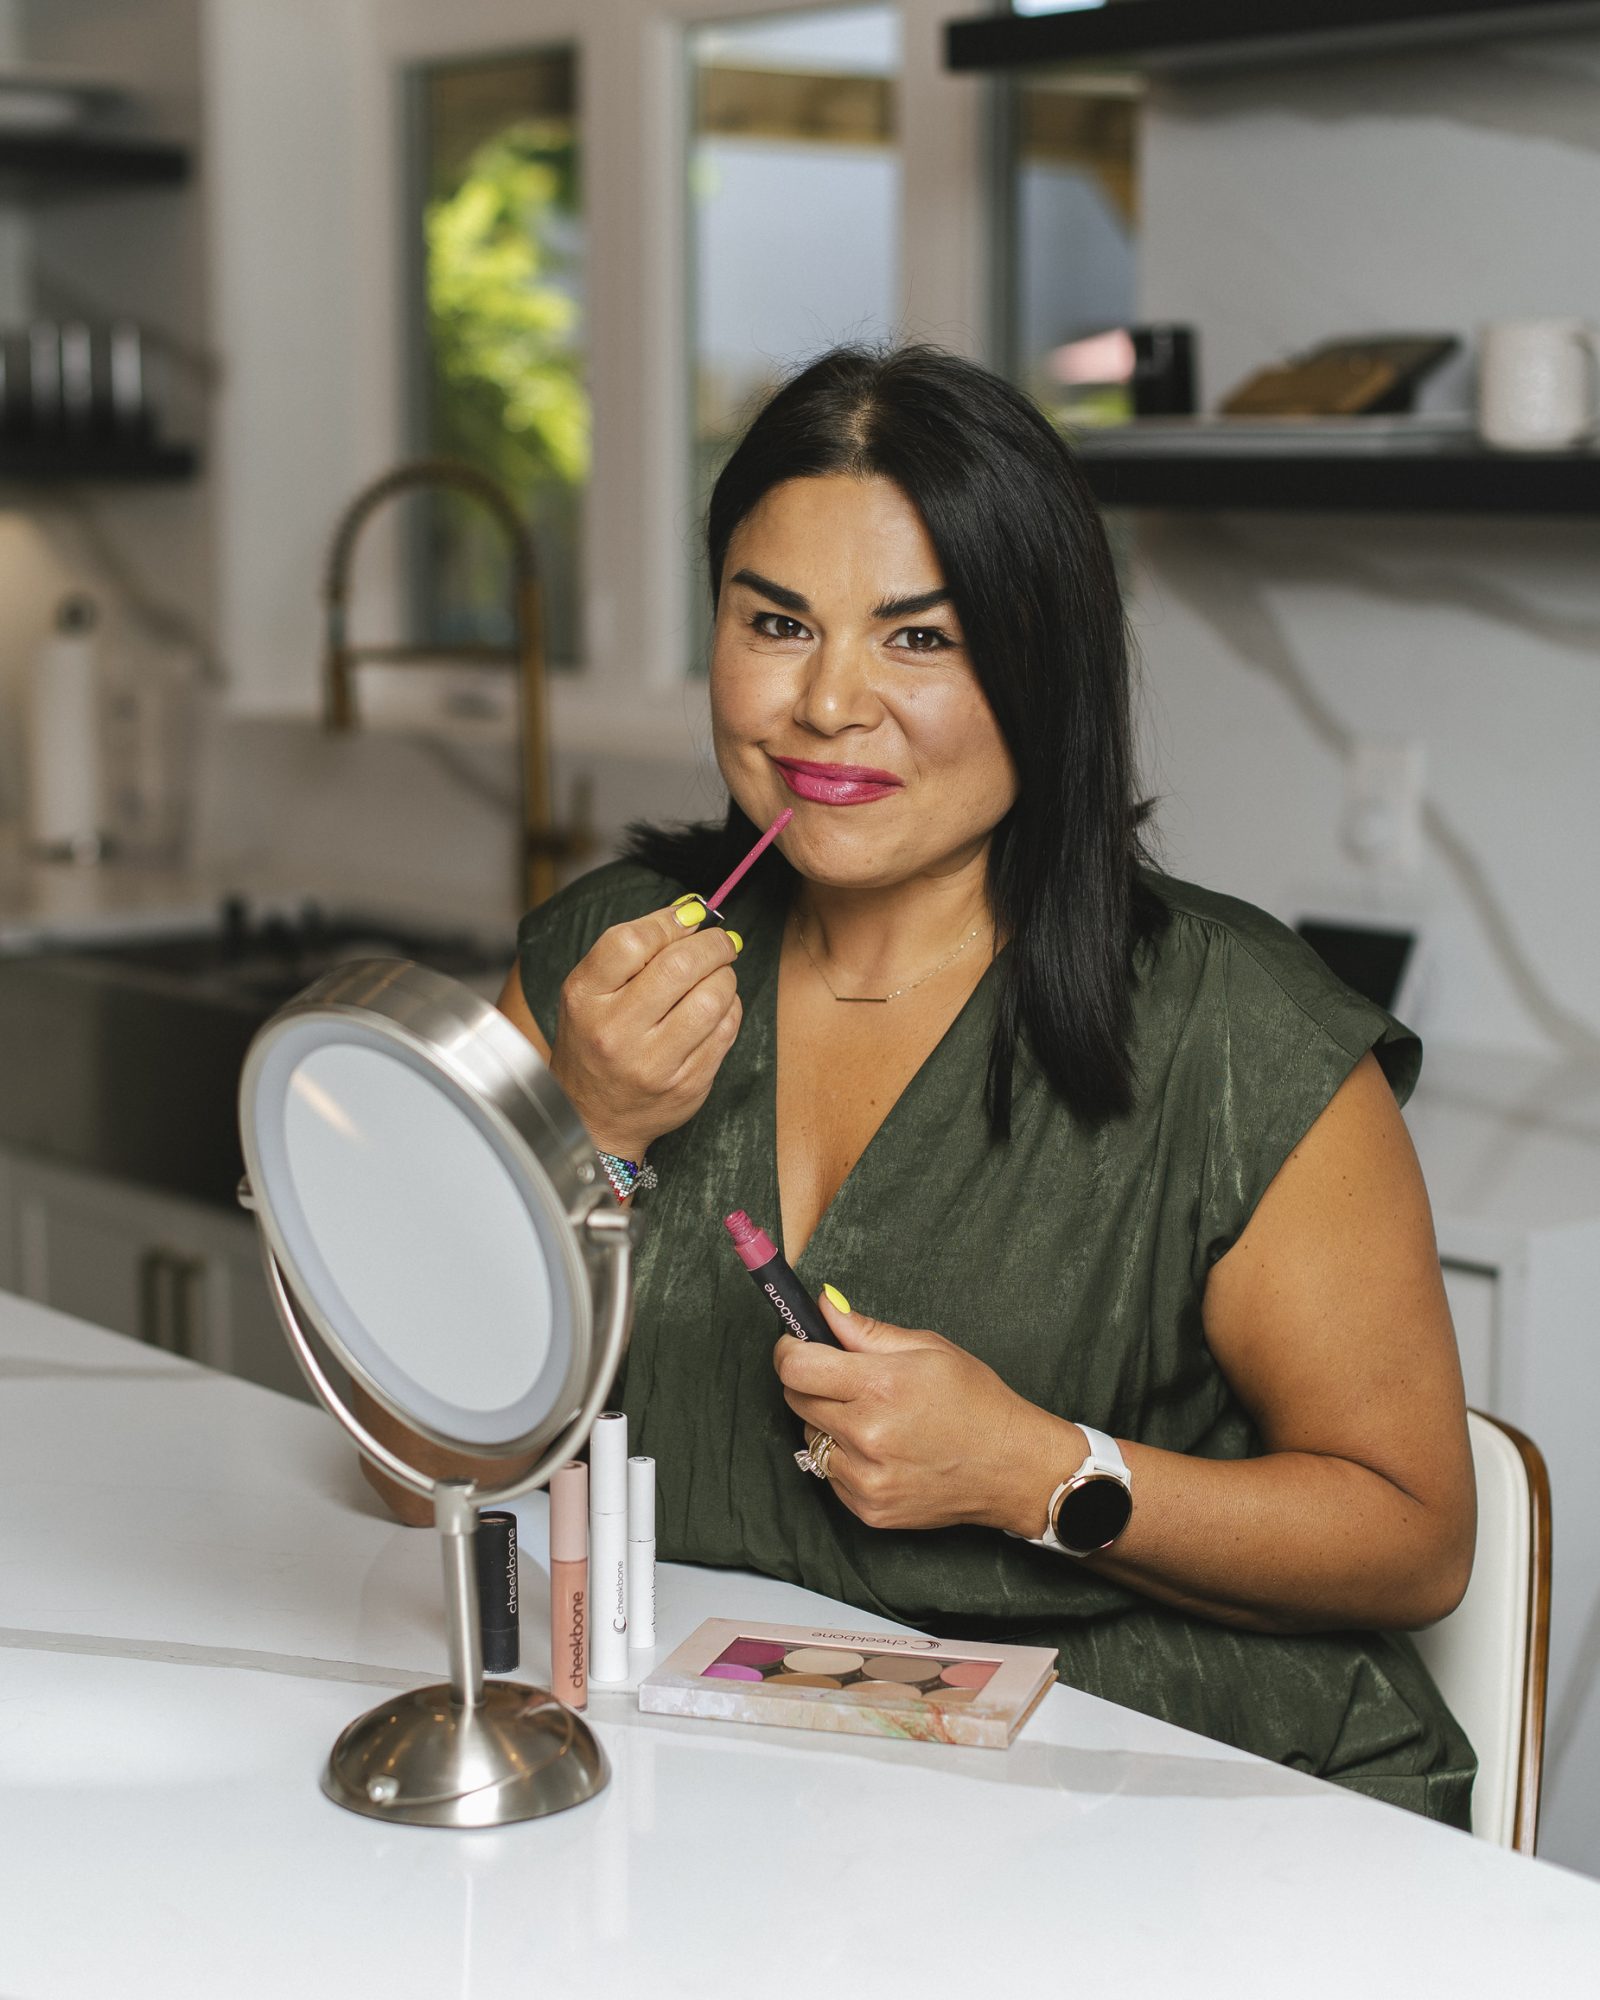 Jenn Harper wearing an olive green blouse. She is seated at a marble counter with a makeup mirror and is applying lip gloss in a home kitchen.